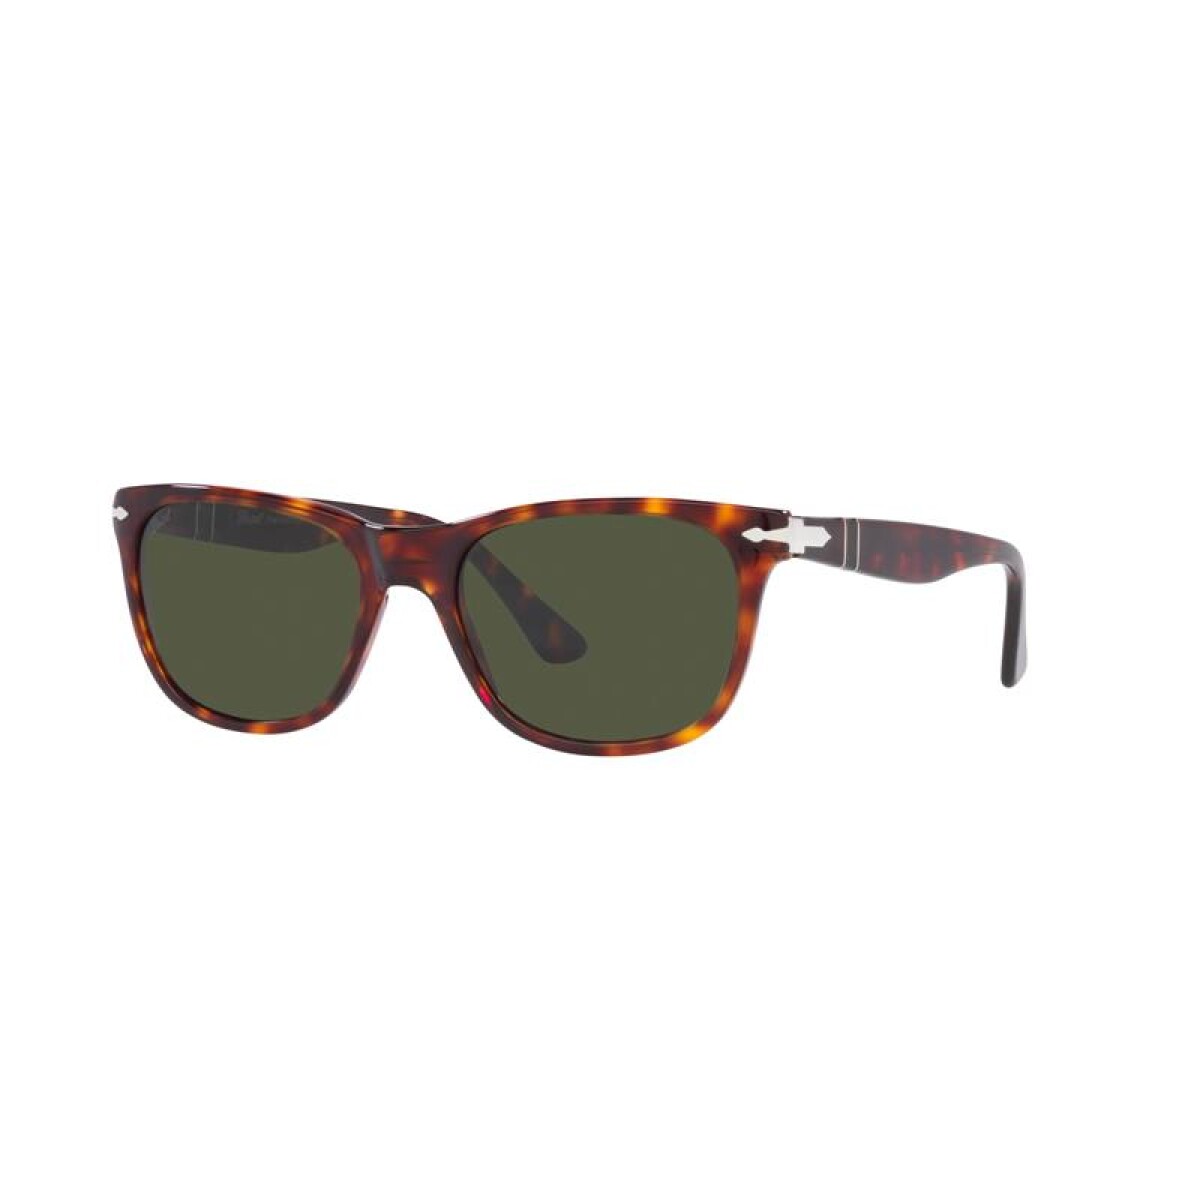 Persol 3291-s - 24/31 